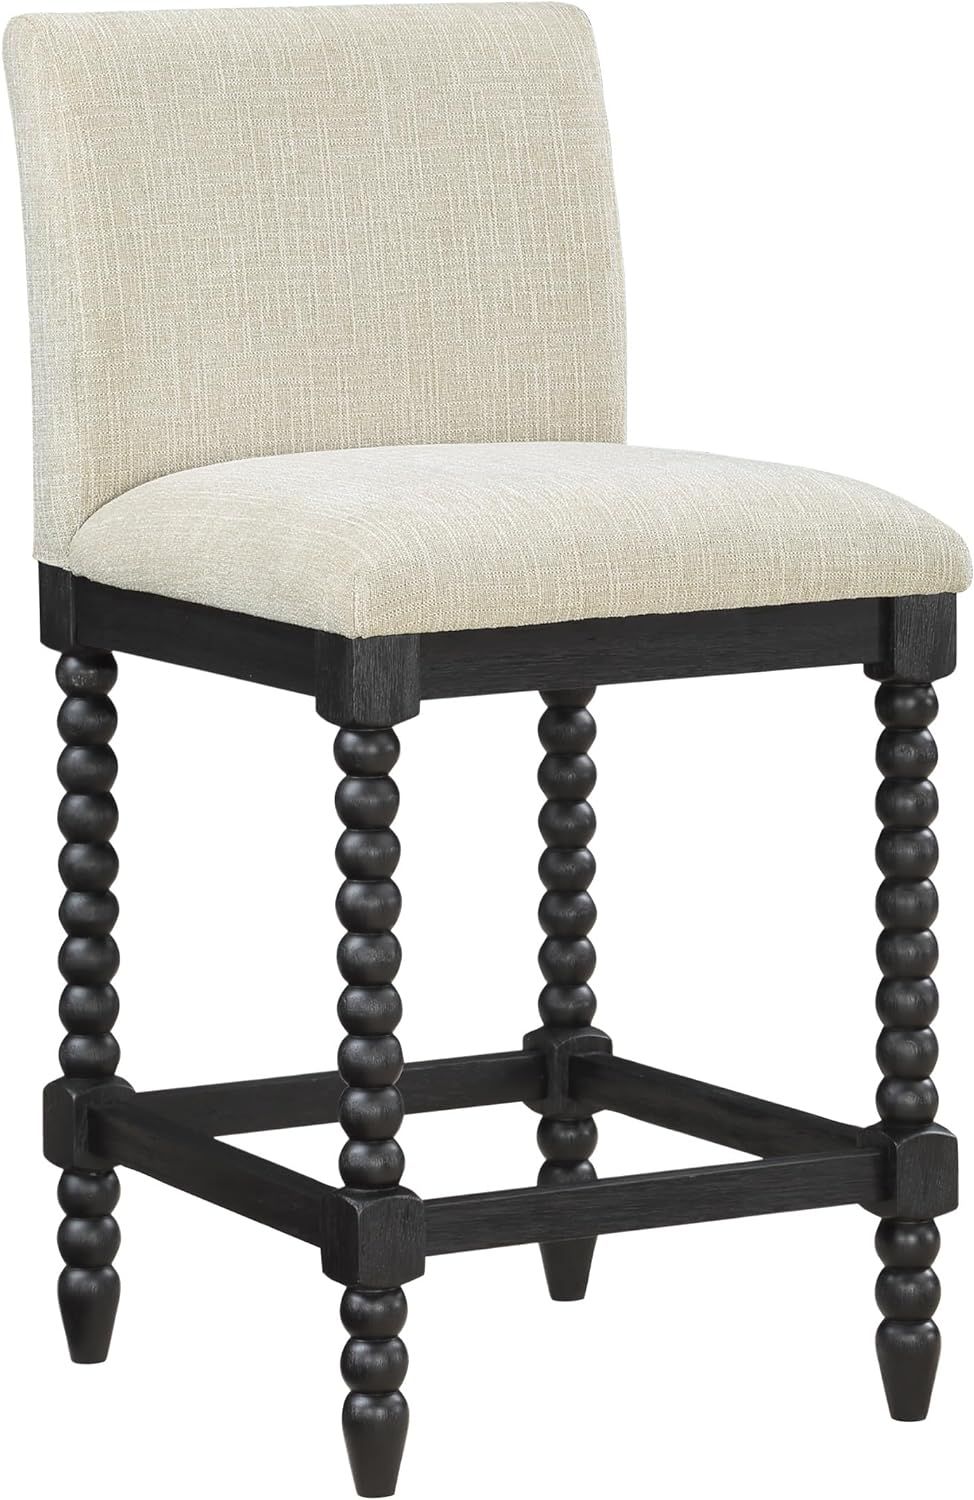 OSP Home Furnishings Eliza Spindle Counter Height Stool with Black Frame, Linen Fabric | Amazon (US)